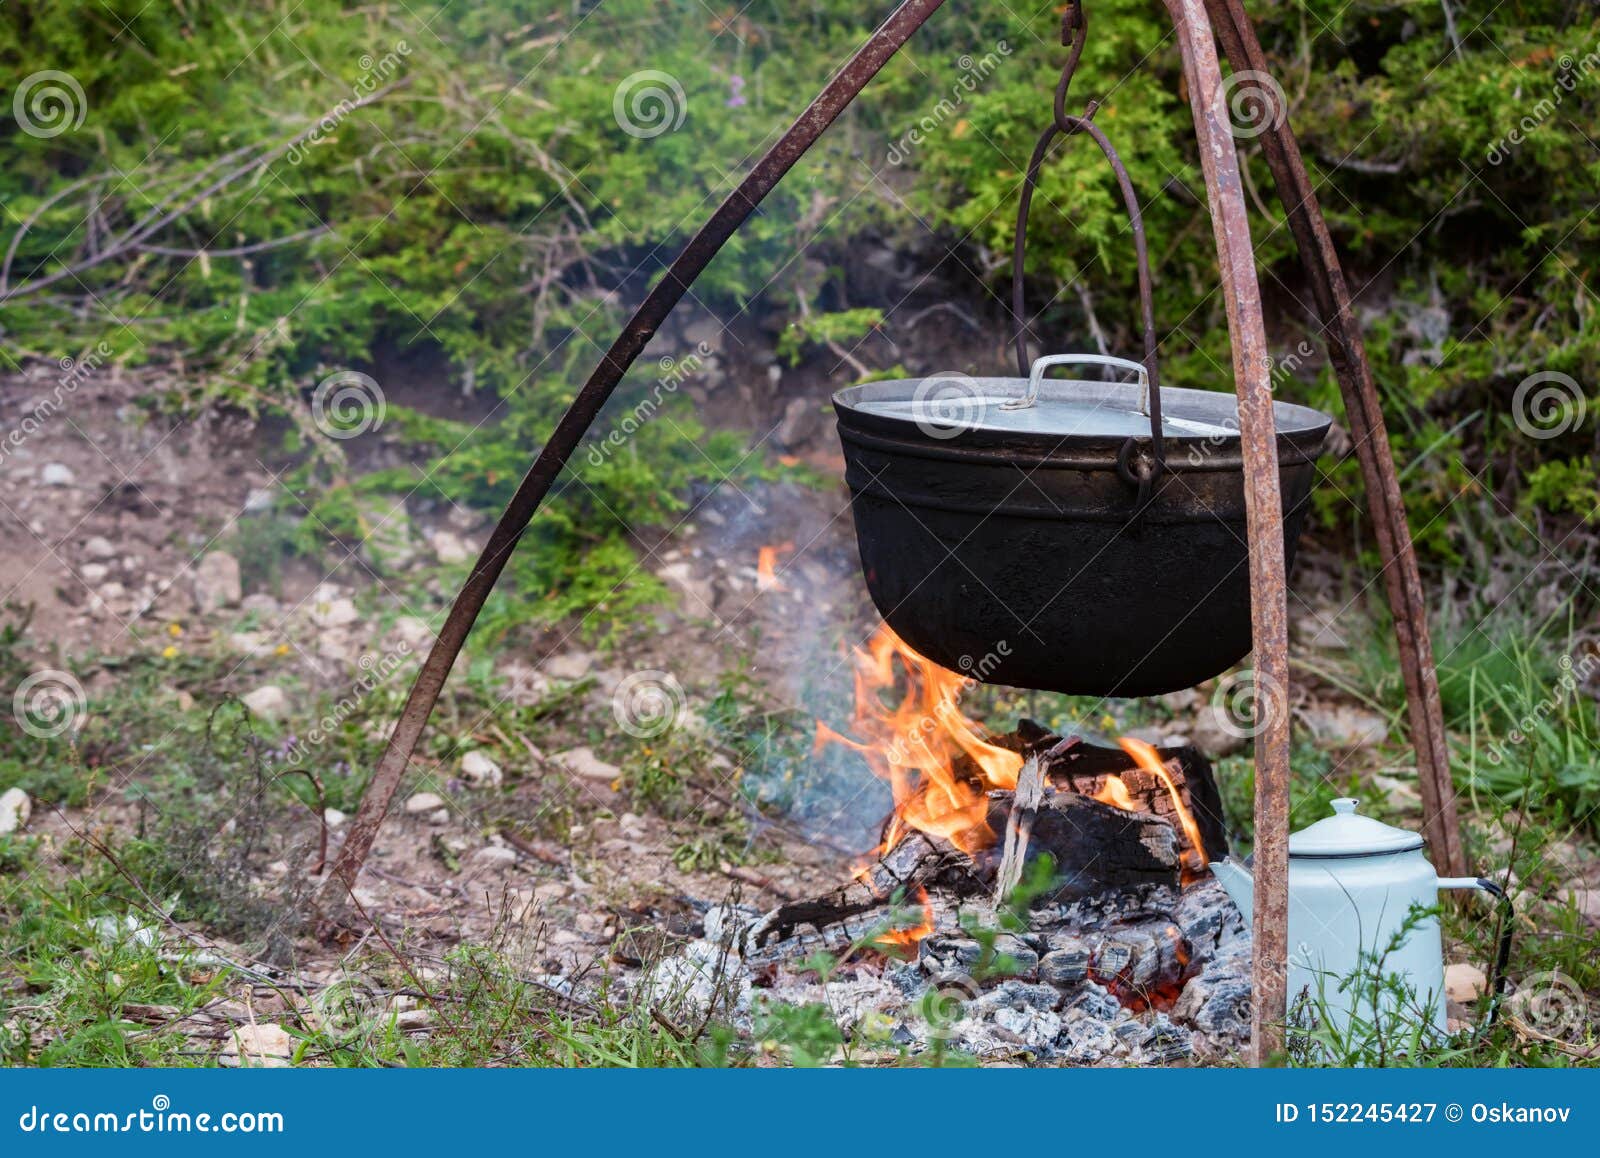 Cauldron or Camping Kettle Over Open Fire Outdoors Stock Image - Image of  equipment, meal: 152245427